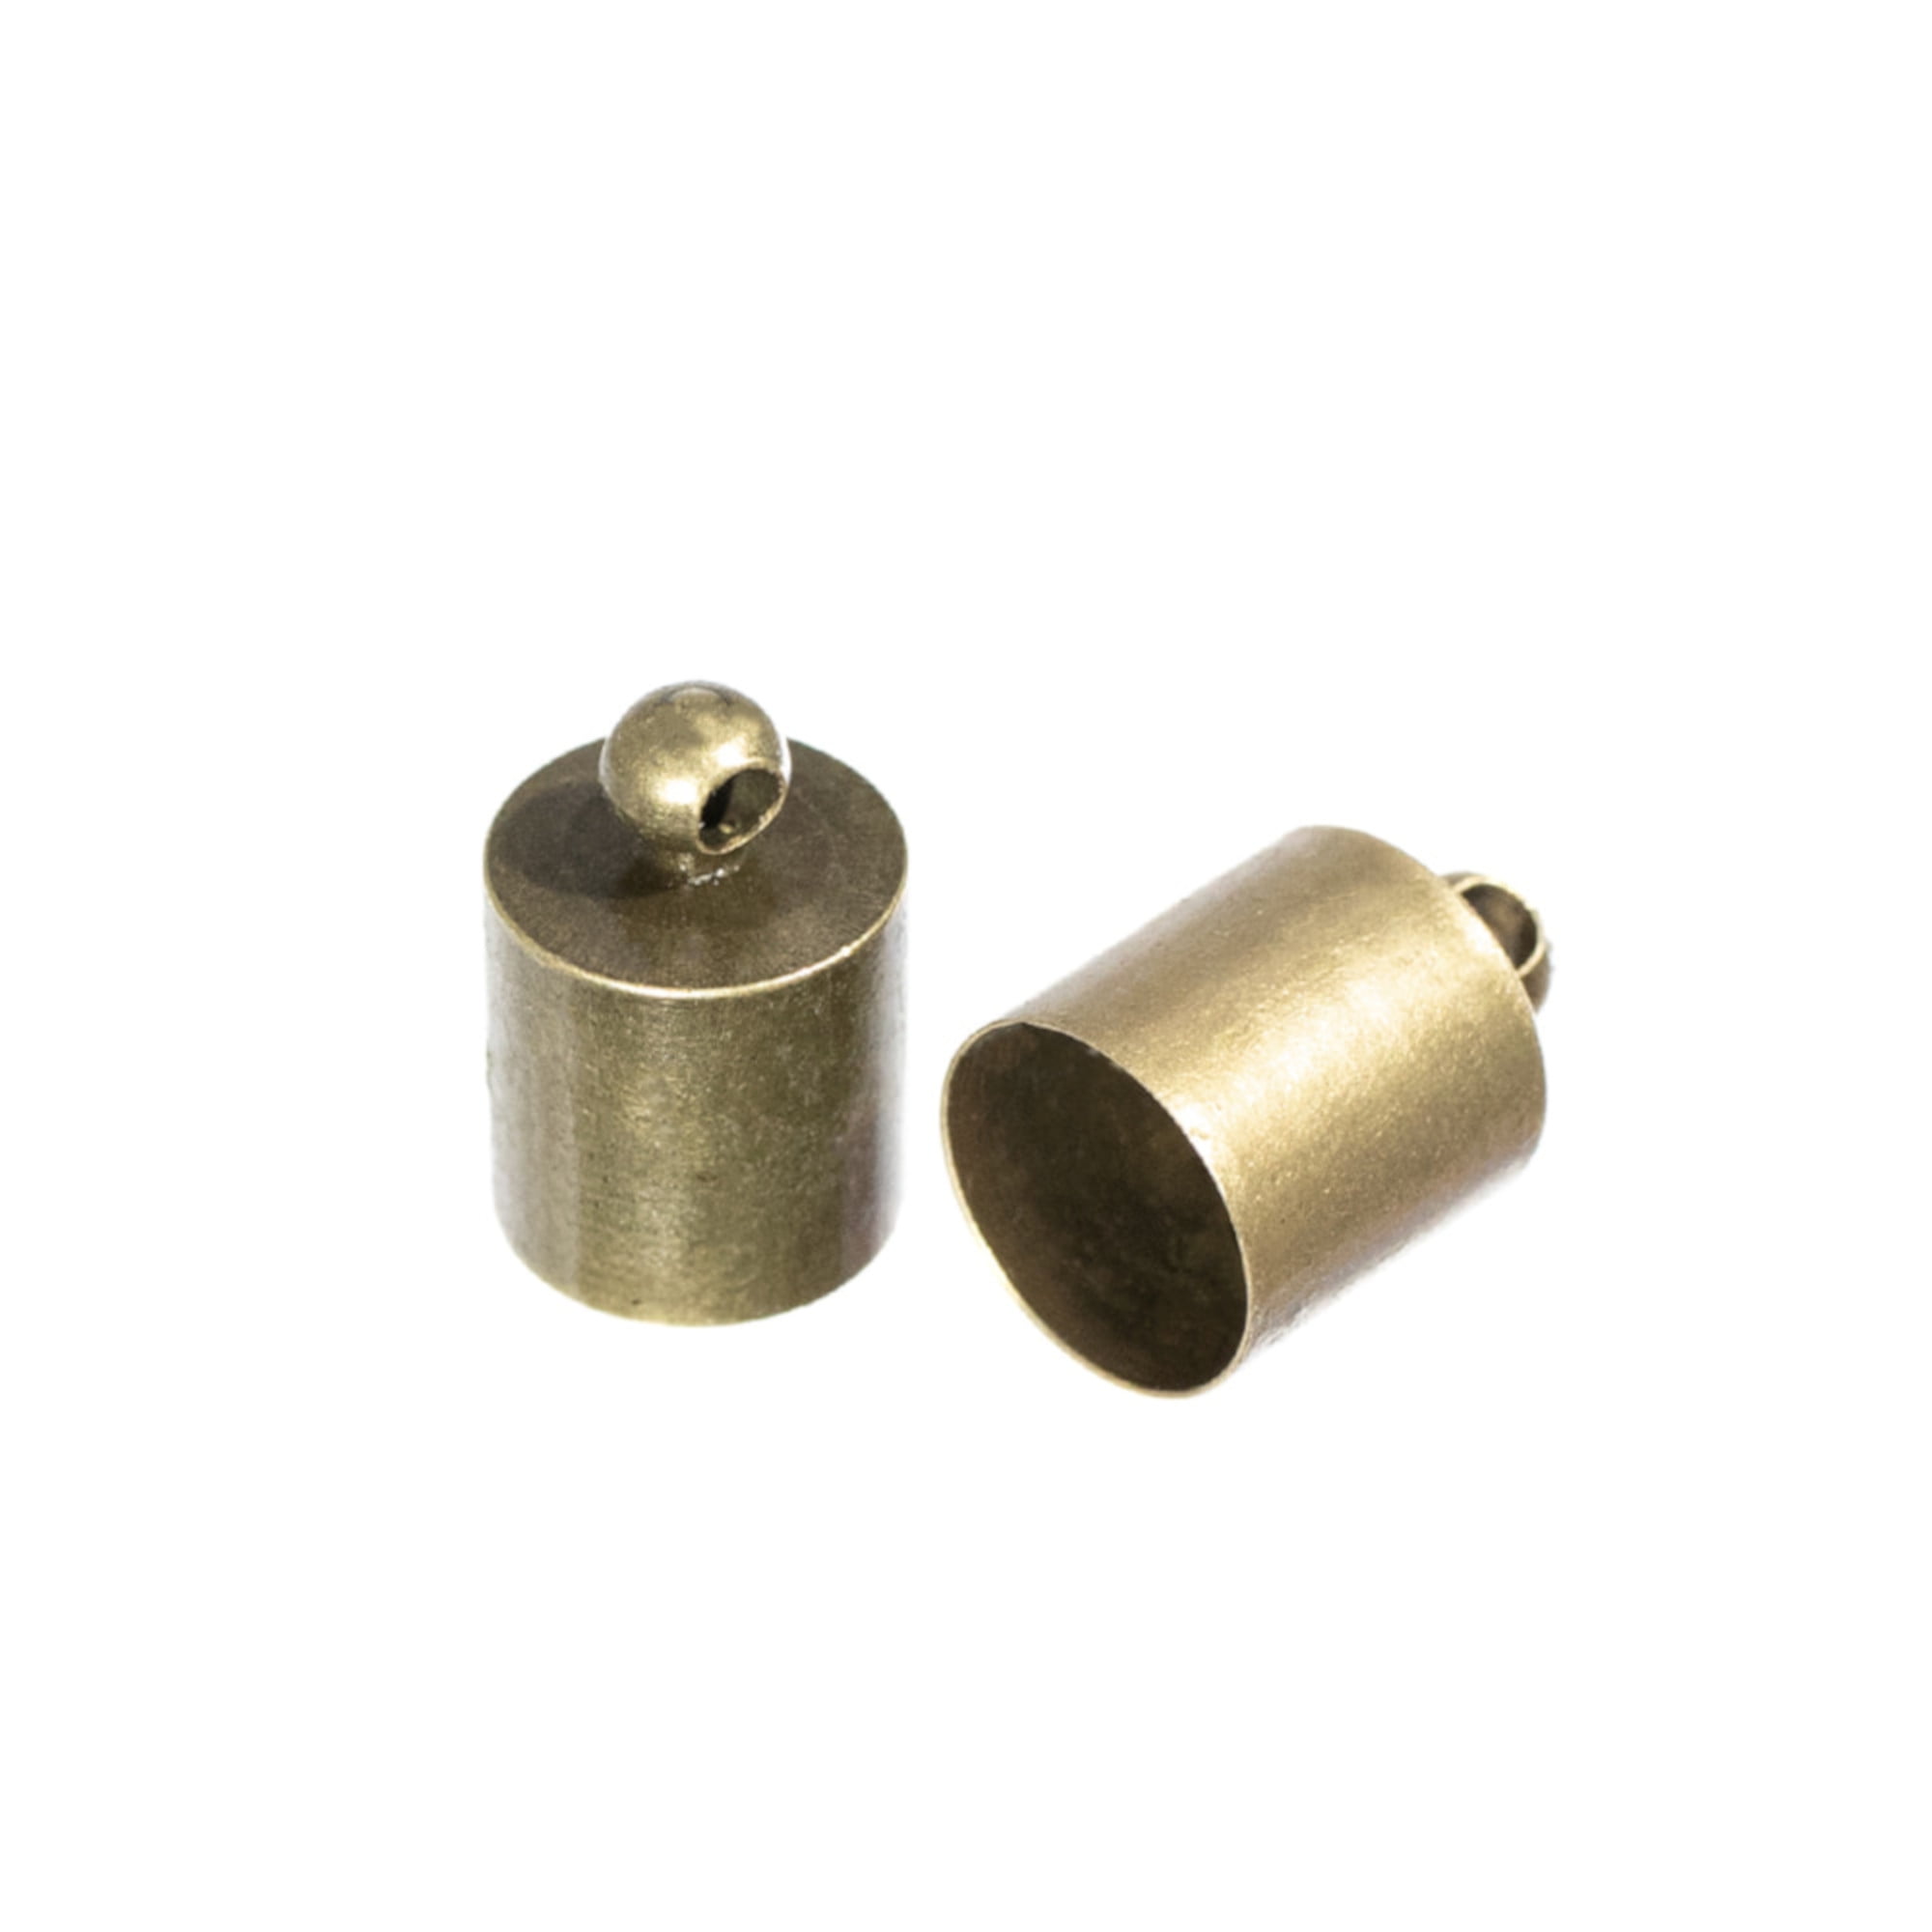 5 12mm or 13mm 5mm Craft County Cord End Caps 9mm 10 2 25 10mm 8mm 6mm 7mm Bronze or Silver 50 or 100 Packs 3mm 